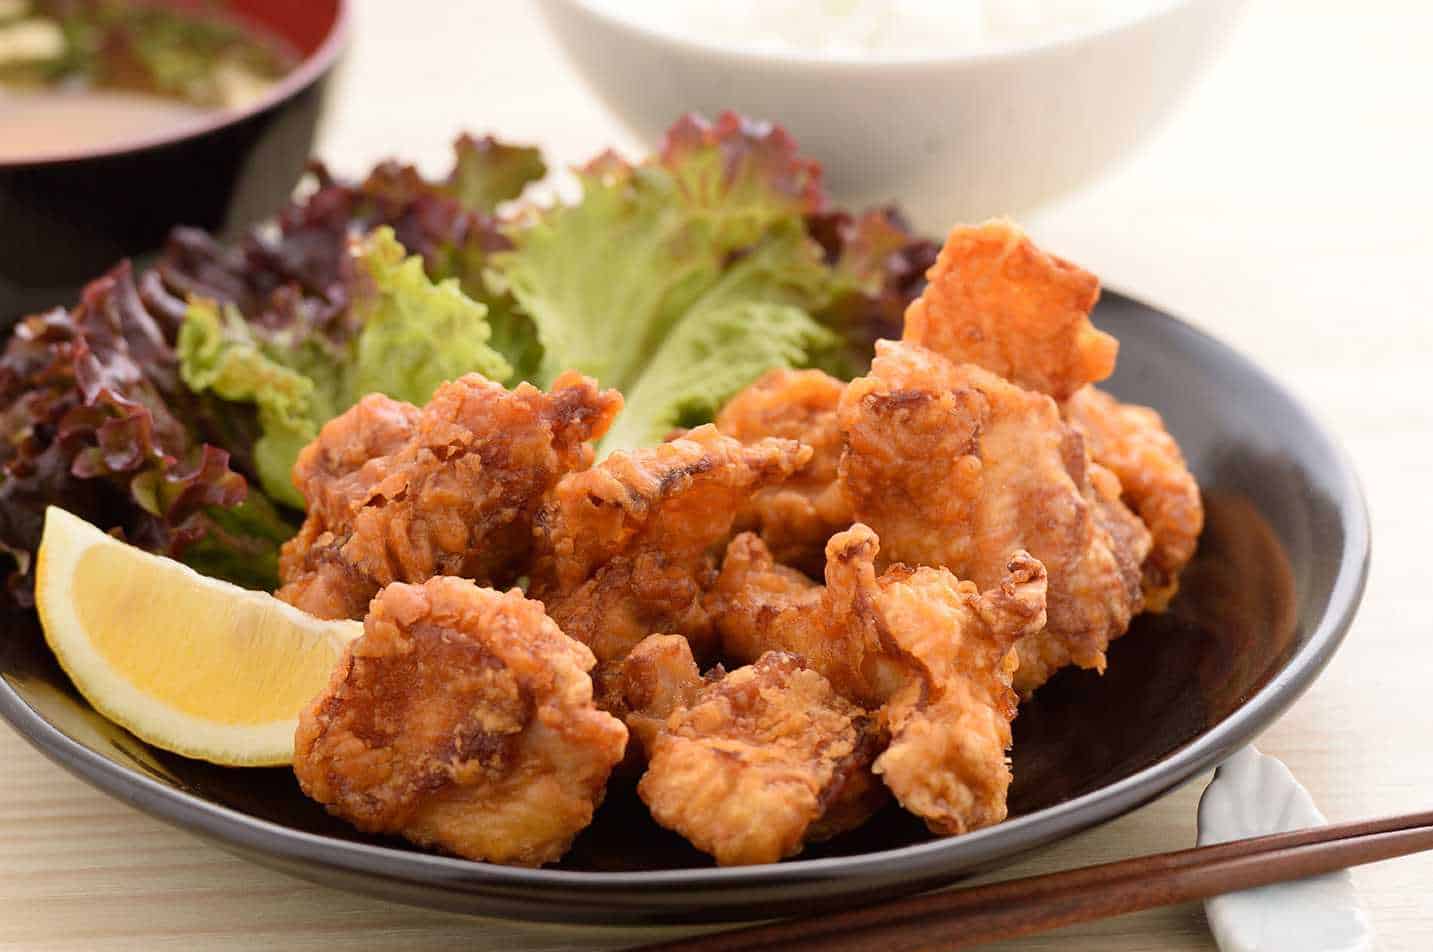 Karaage-what goes well with sushi